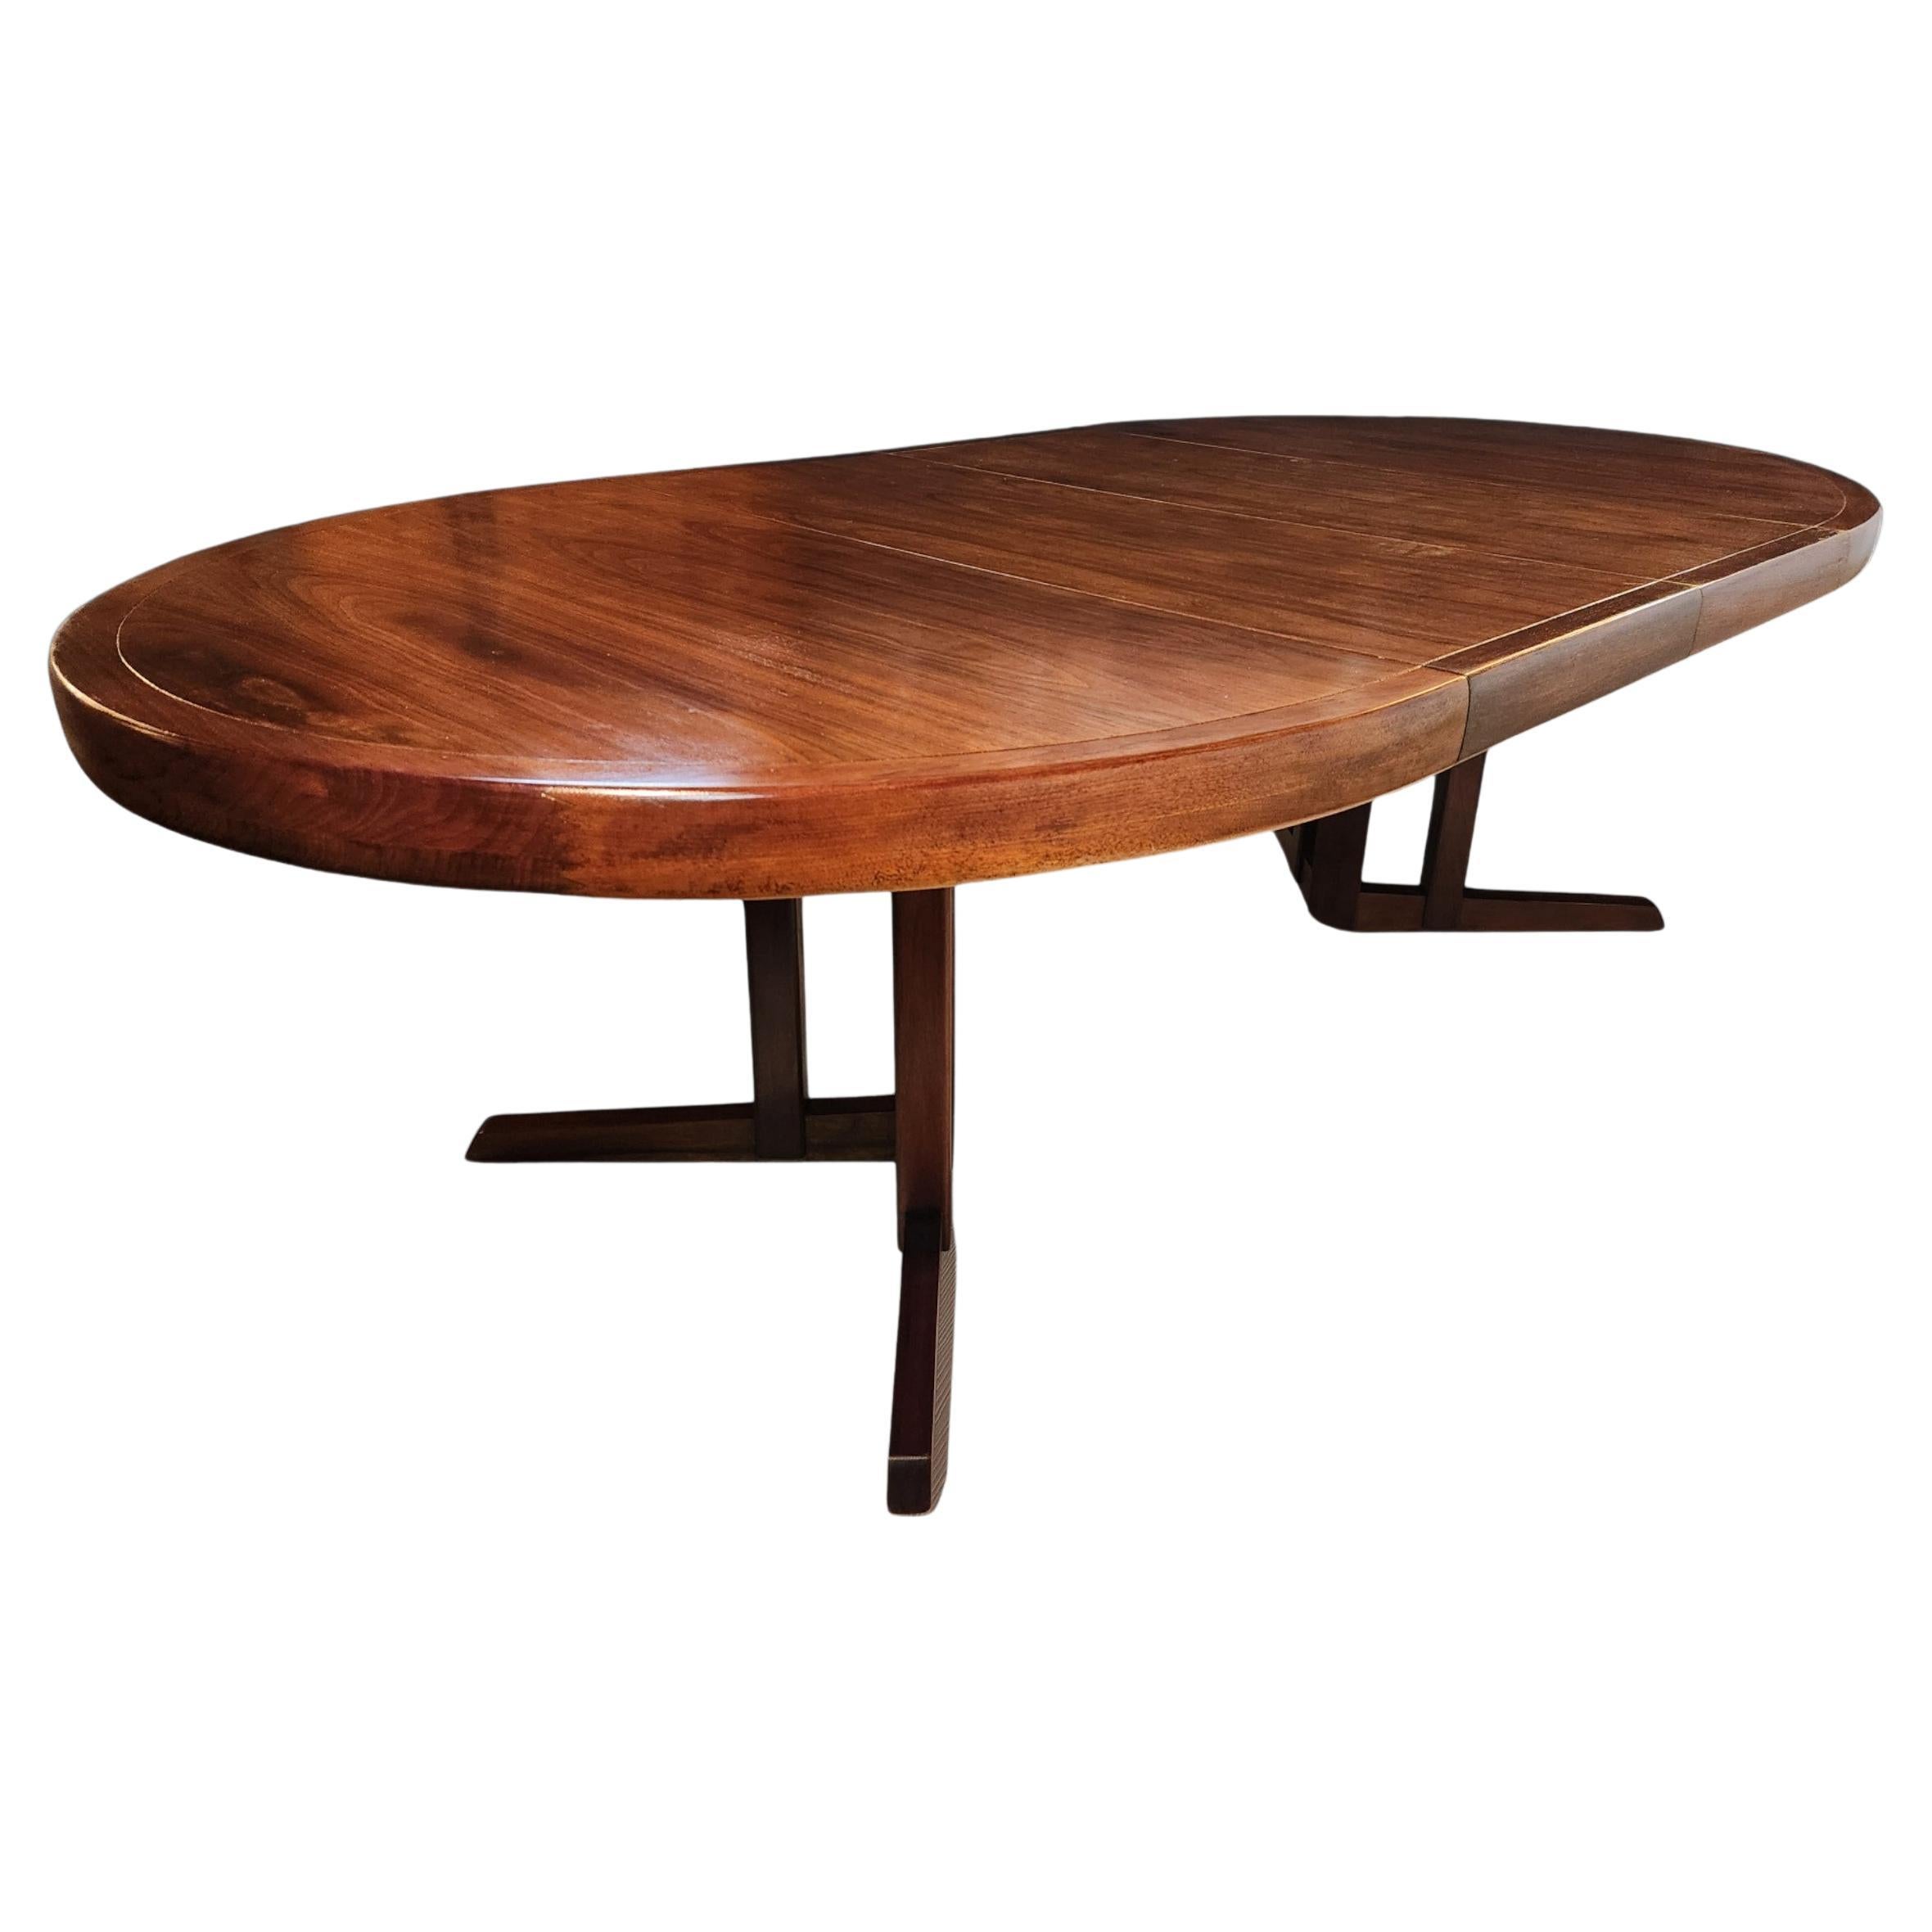 George Nakashima Extendable Walnut Dining Table Model 277 for Widdicomb, 1959 For Sale